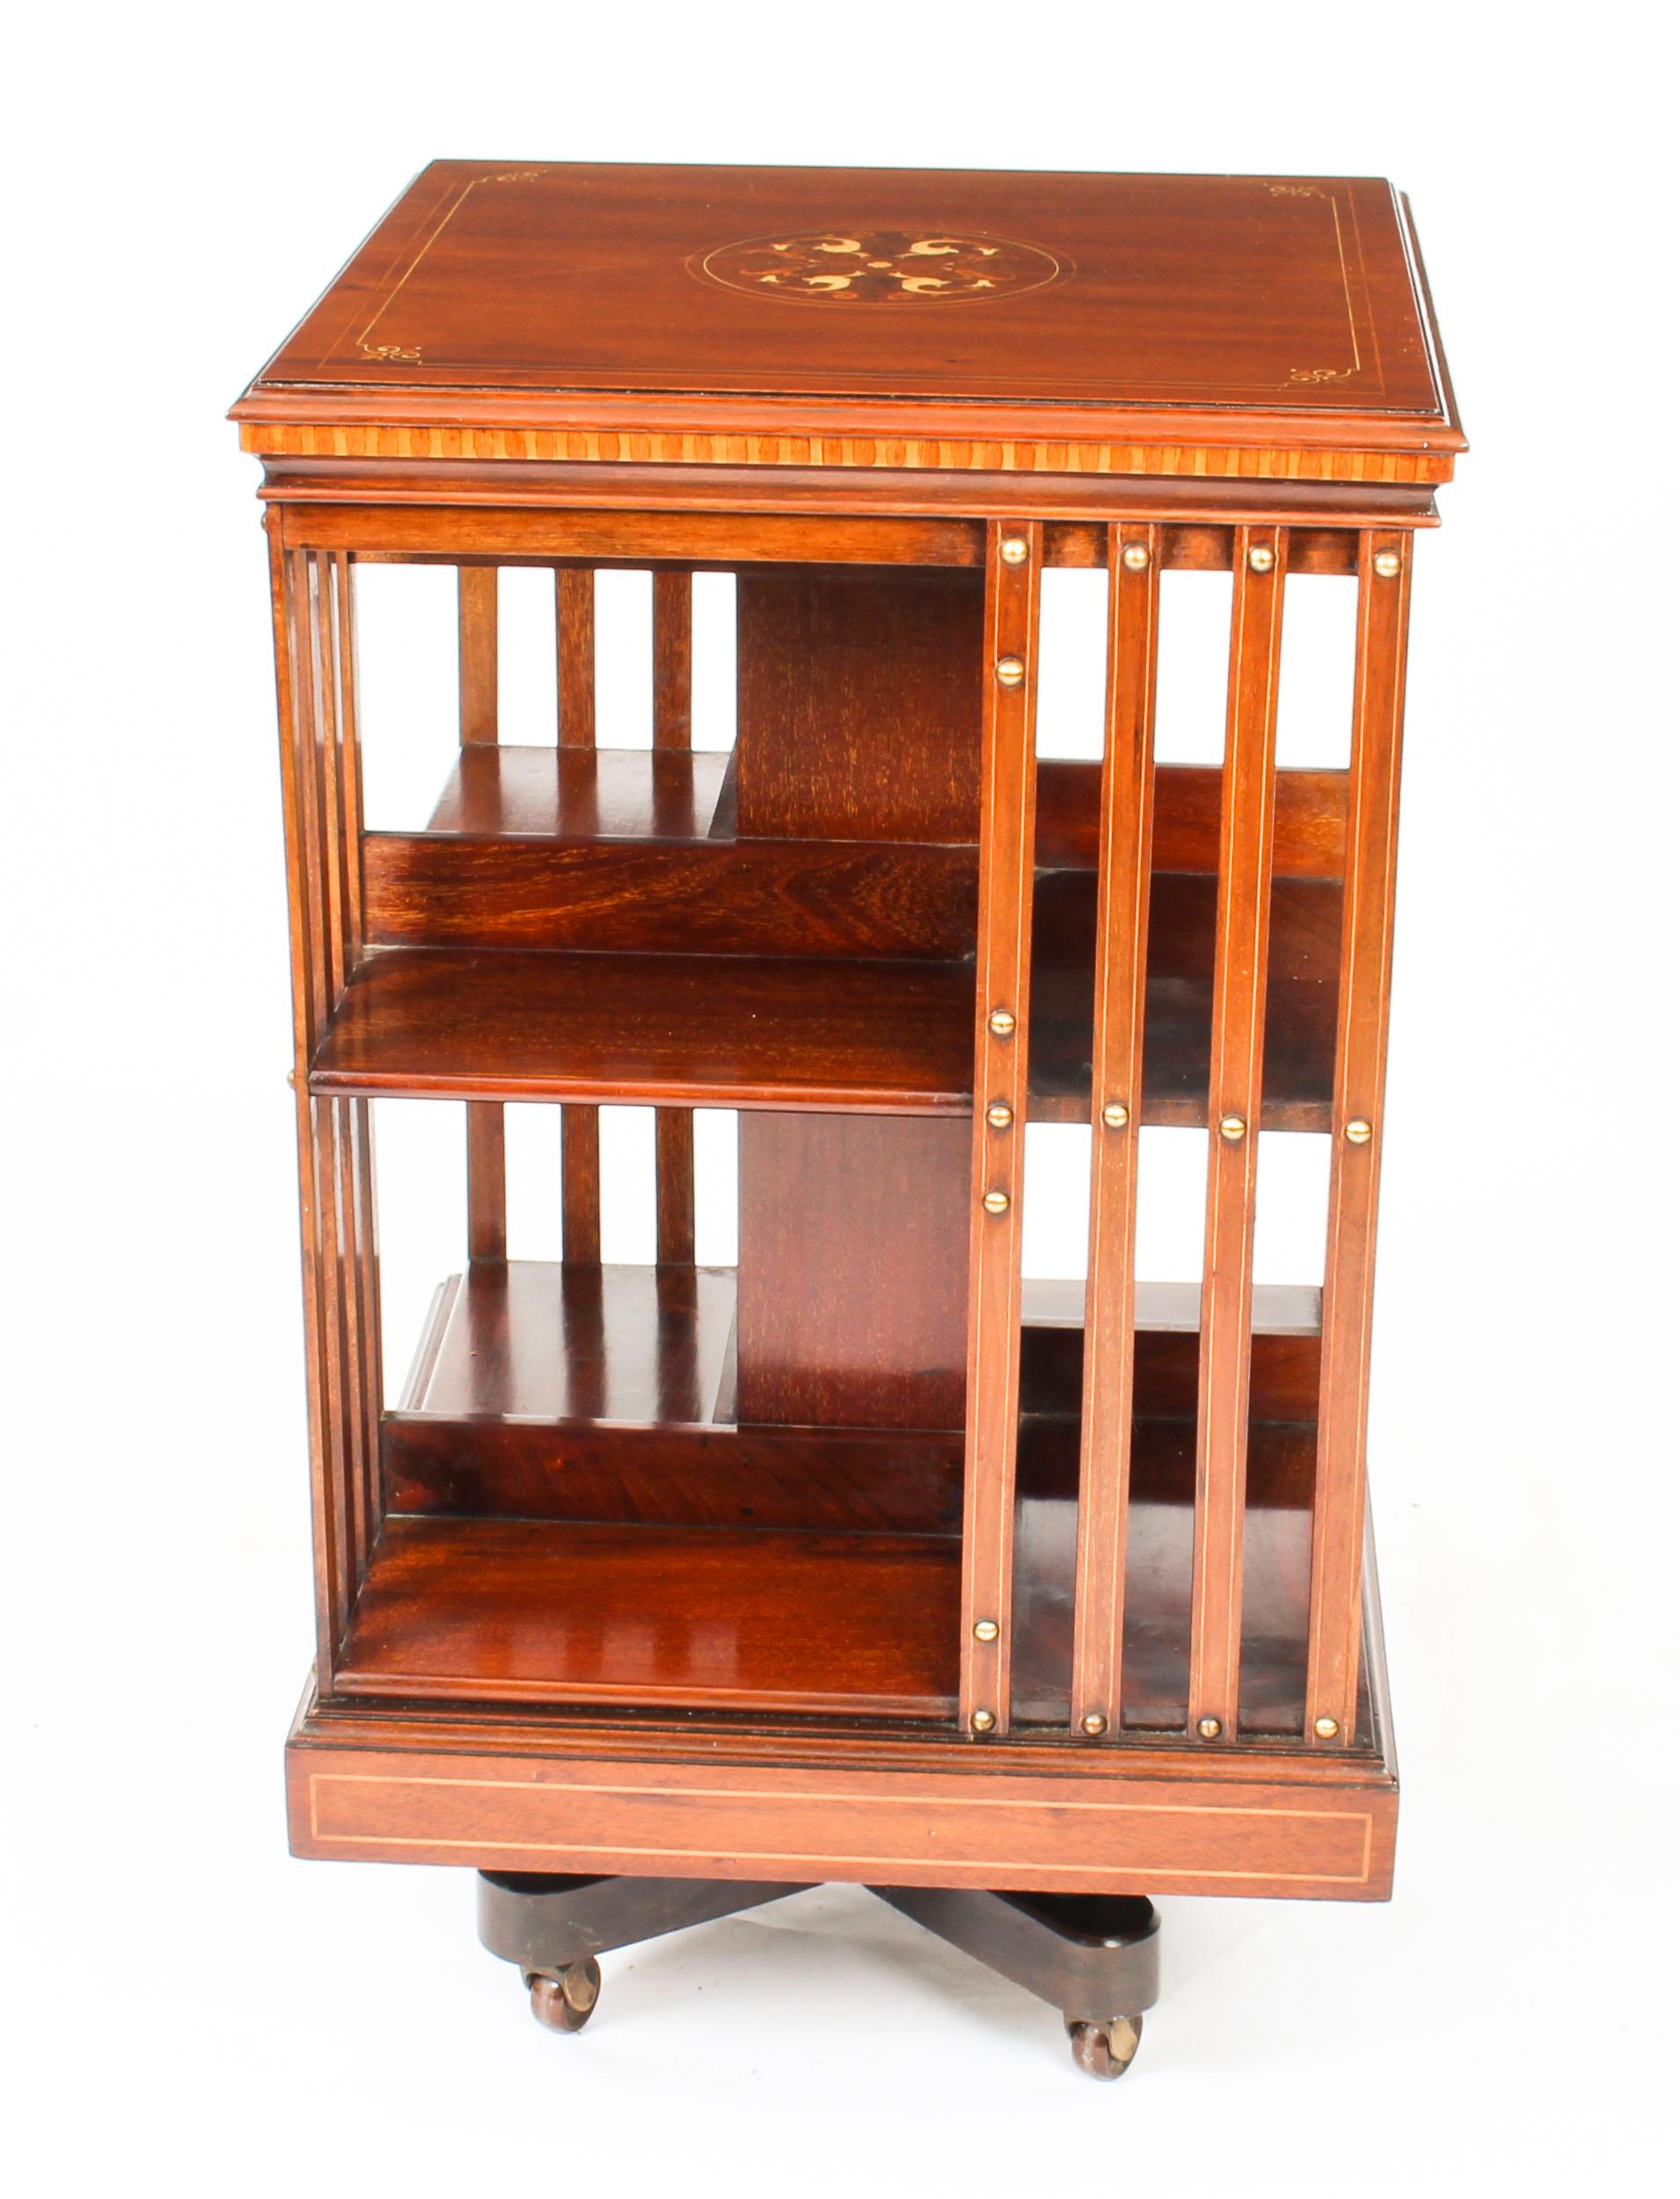 Marquetry Early 20th Century Edwardian Inlaid Mahogany Square Revolving Bookcase